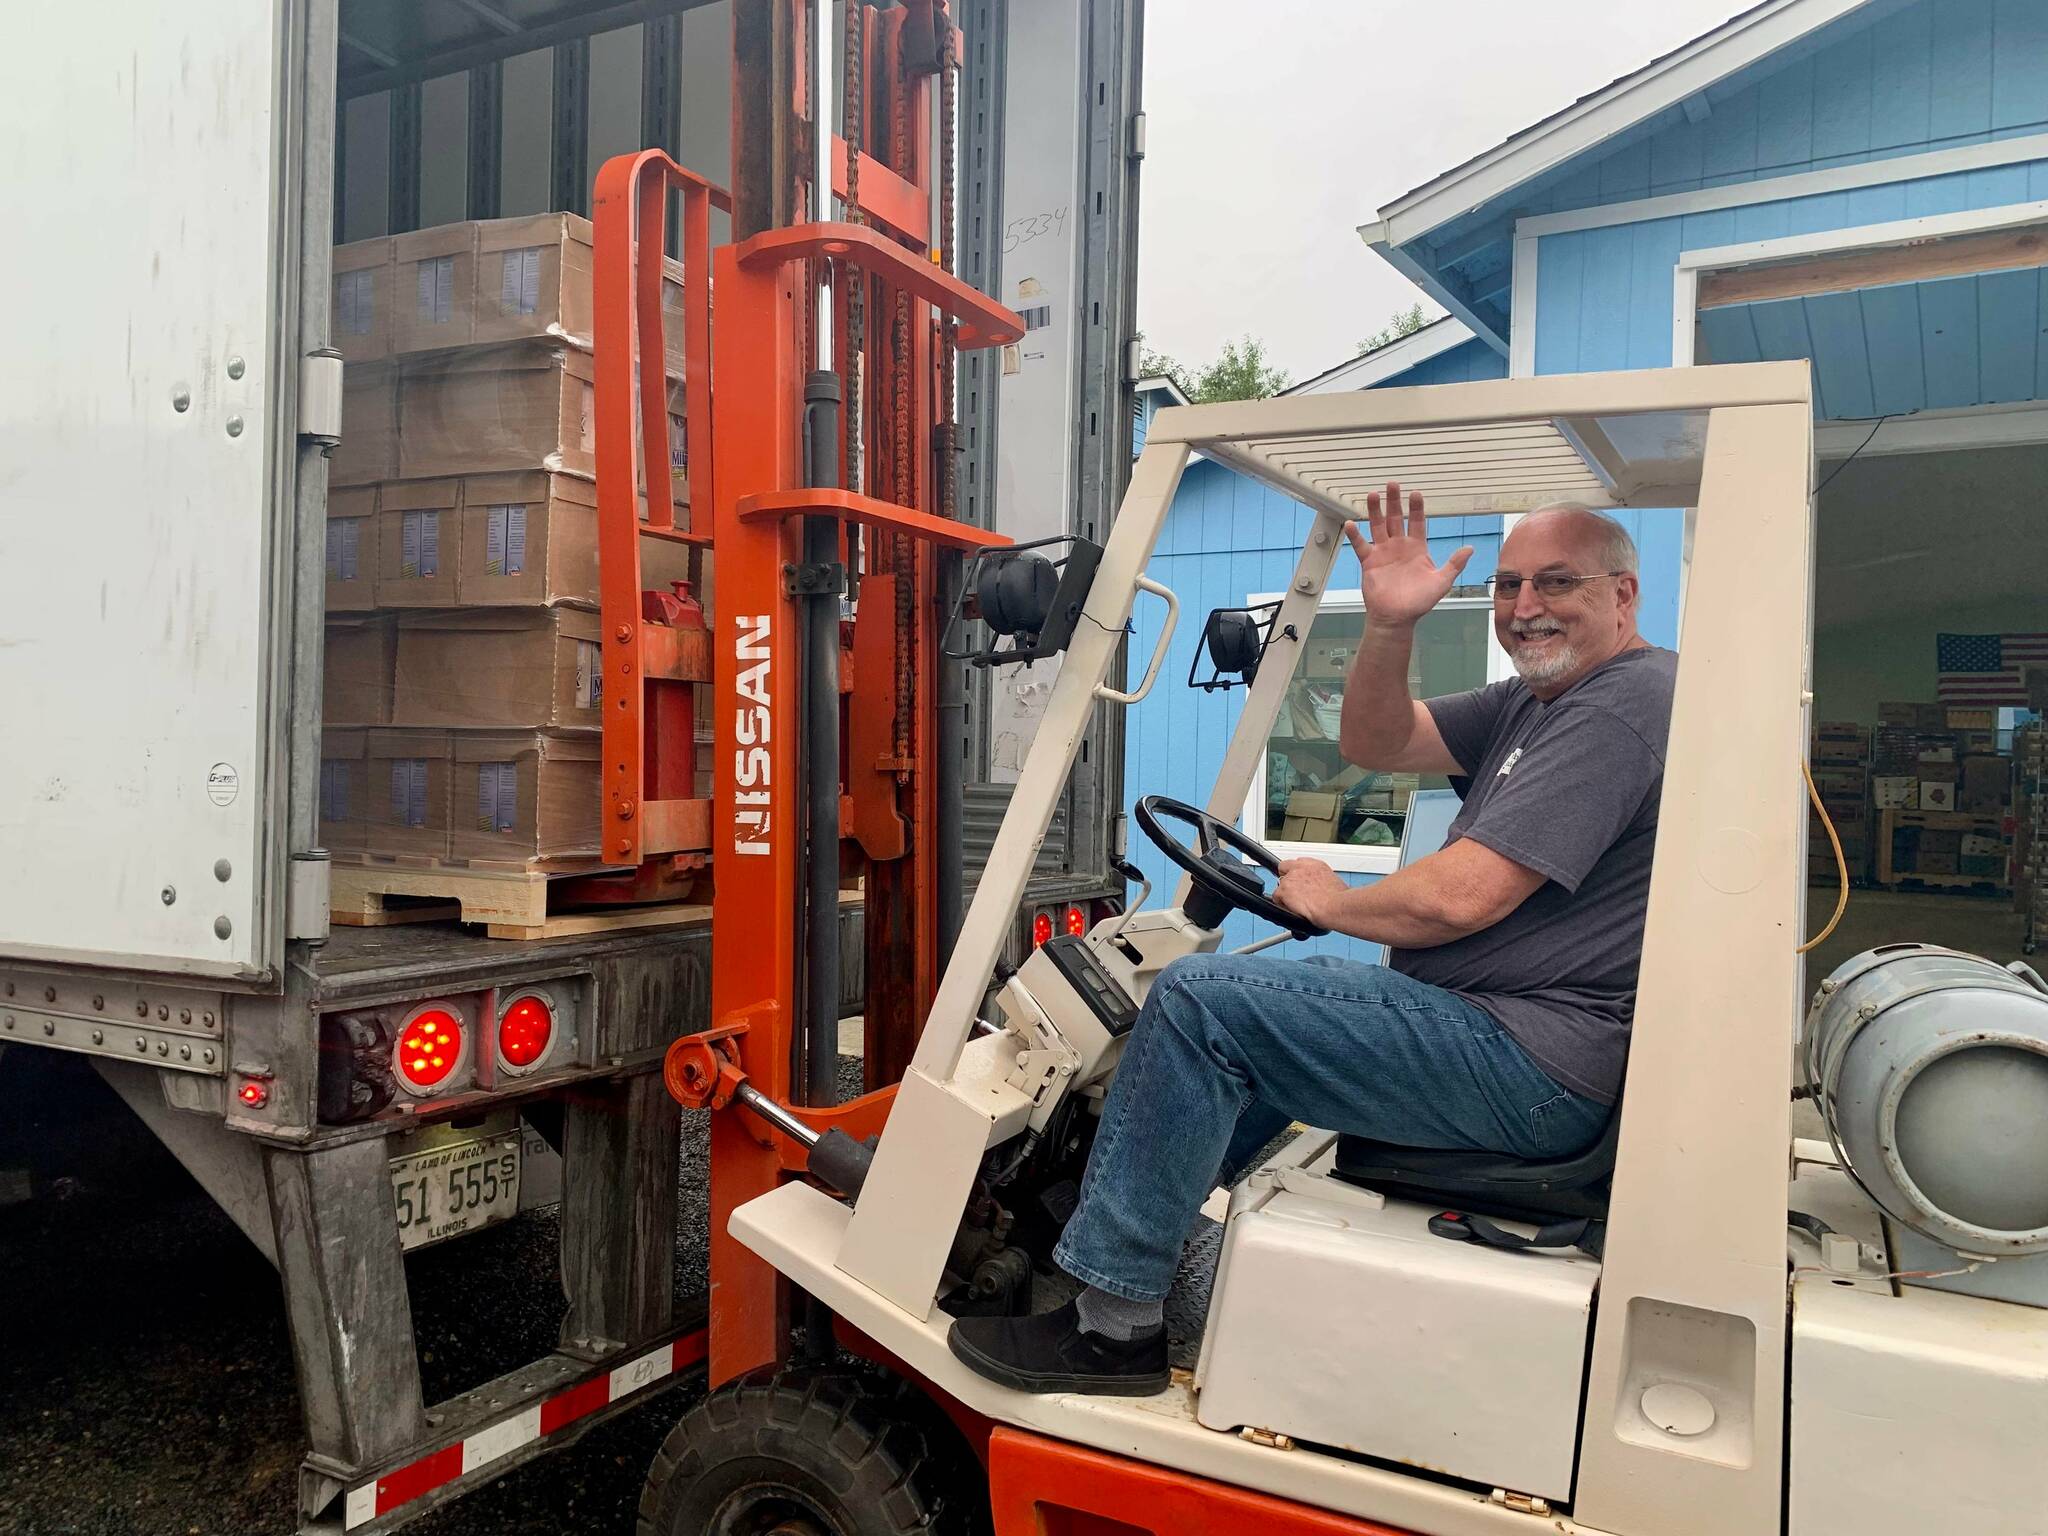 Photo Courtesy of Miriam Jones
Jeff Moyer, executive director for North Beach Senior Center of Ocean Shores, drives a forklift on Wednesday morning, Aug. 3, 2022, in order to help transport 40,000 pounds of nonperishable items that came 900 miles from The Church of Jesus Christ of Latter-day Saints in Salt Lake City, Utah.